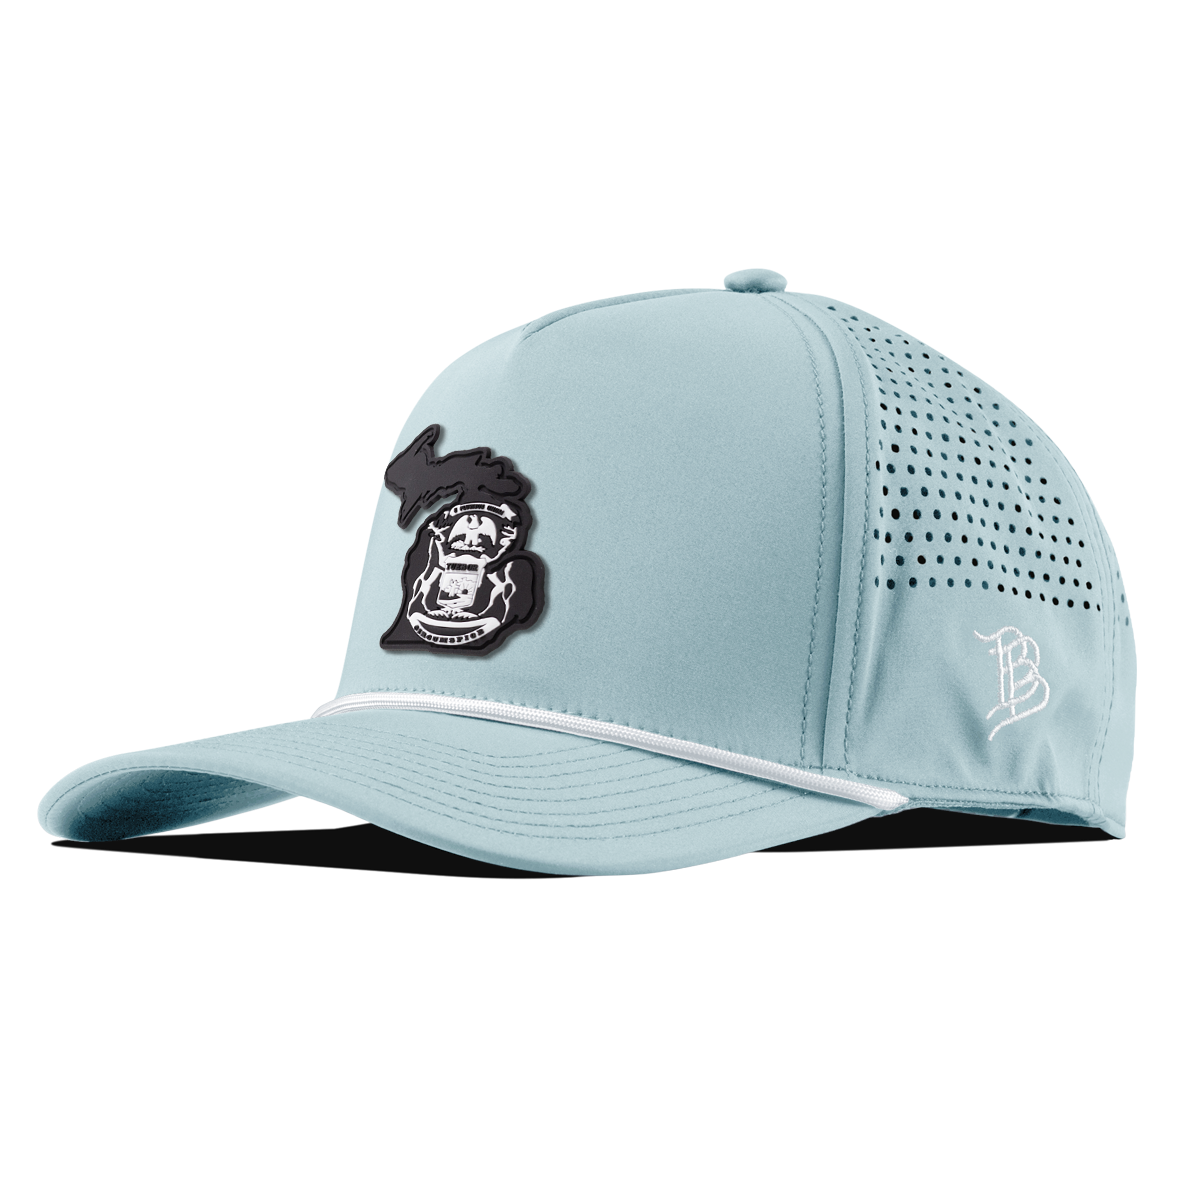 Michigan Vintage Curved 5 Panel Rope Sky Blue/White